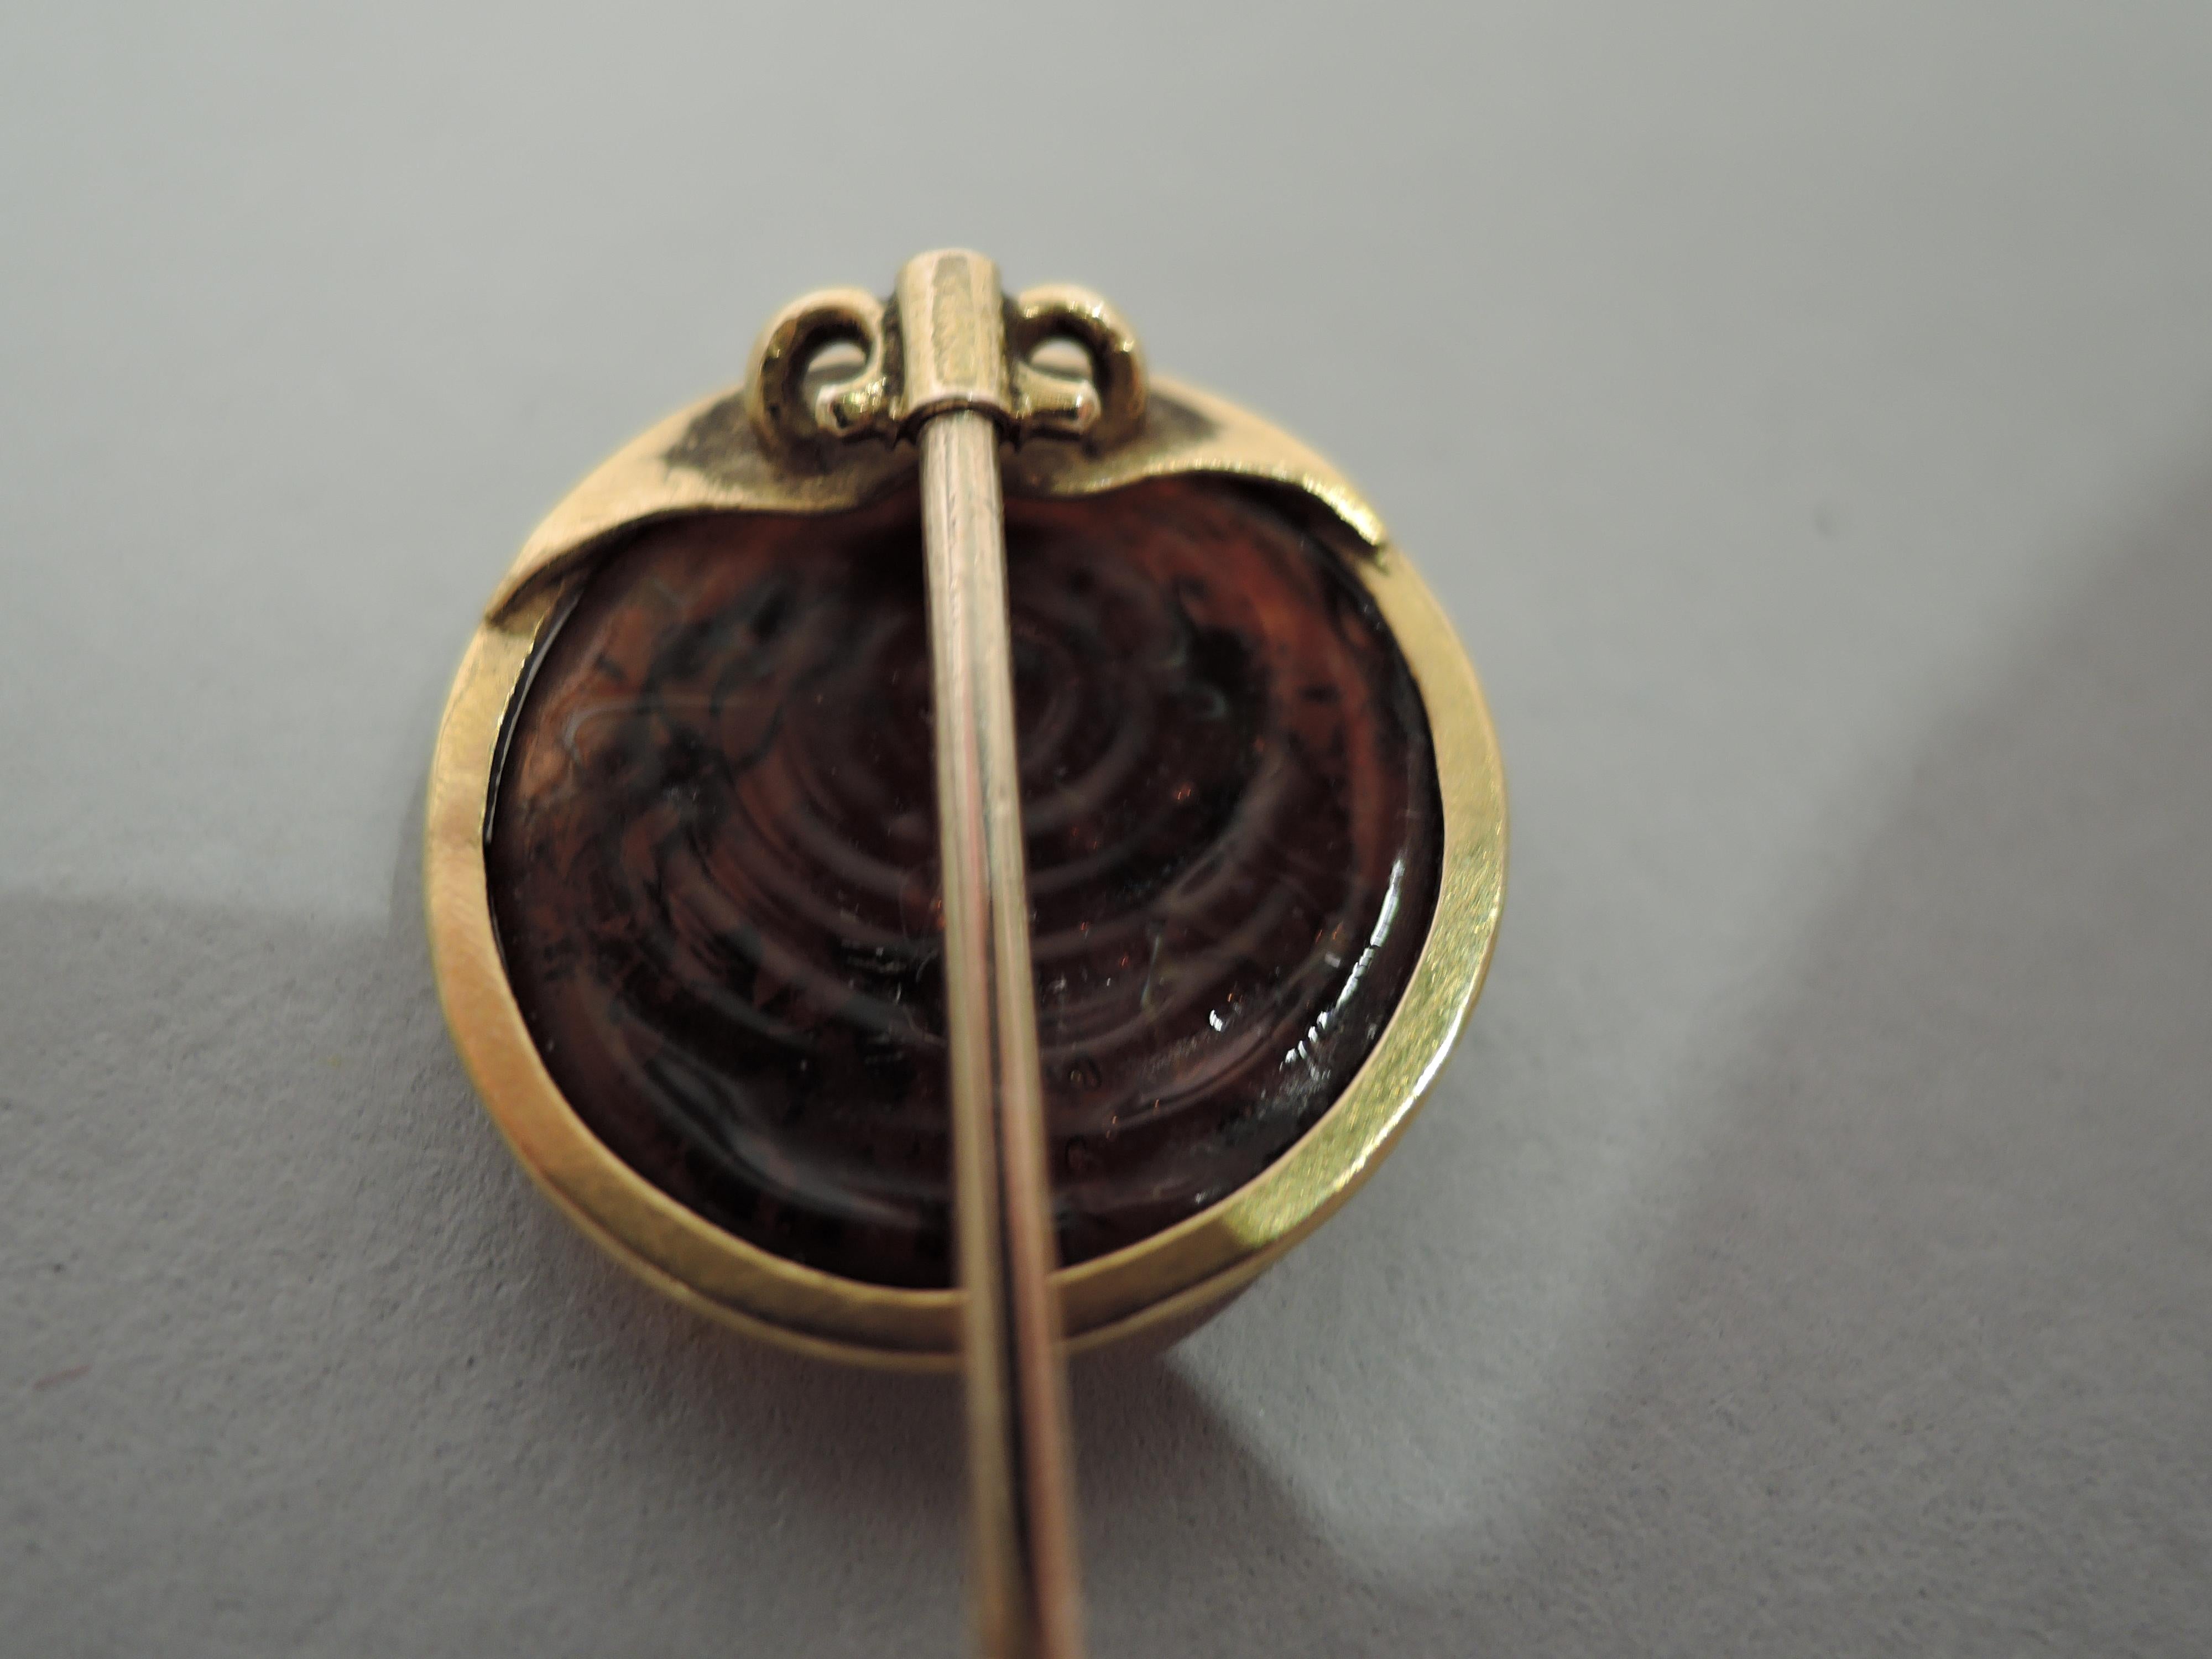 European 15k gold stickpin mounted with carved intaglio cameo, depicting a left-facing Classical female head. The color is reddish brown. It is in a gold frame mounted to a twisted shaft. 